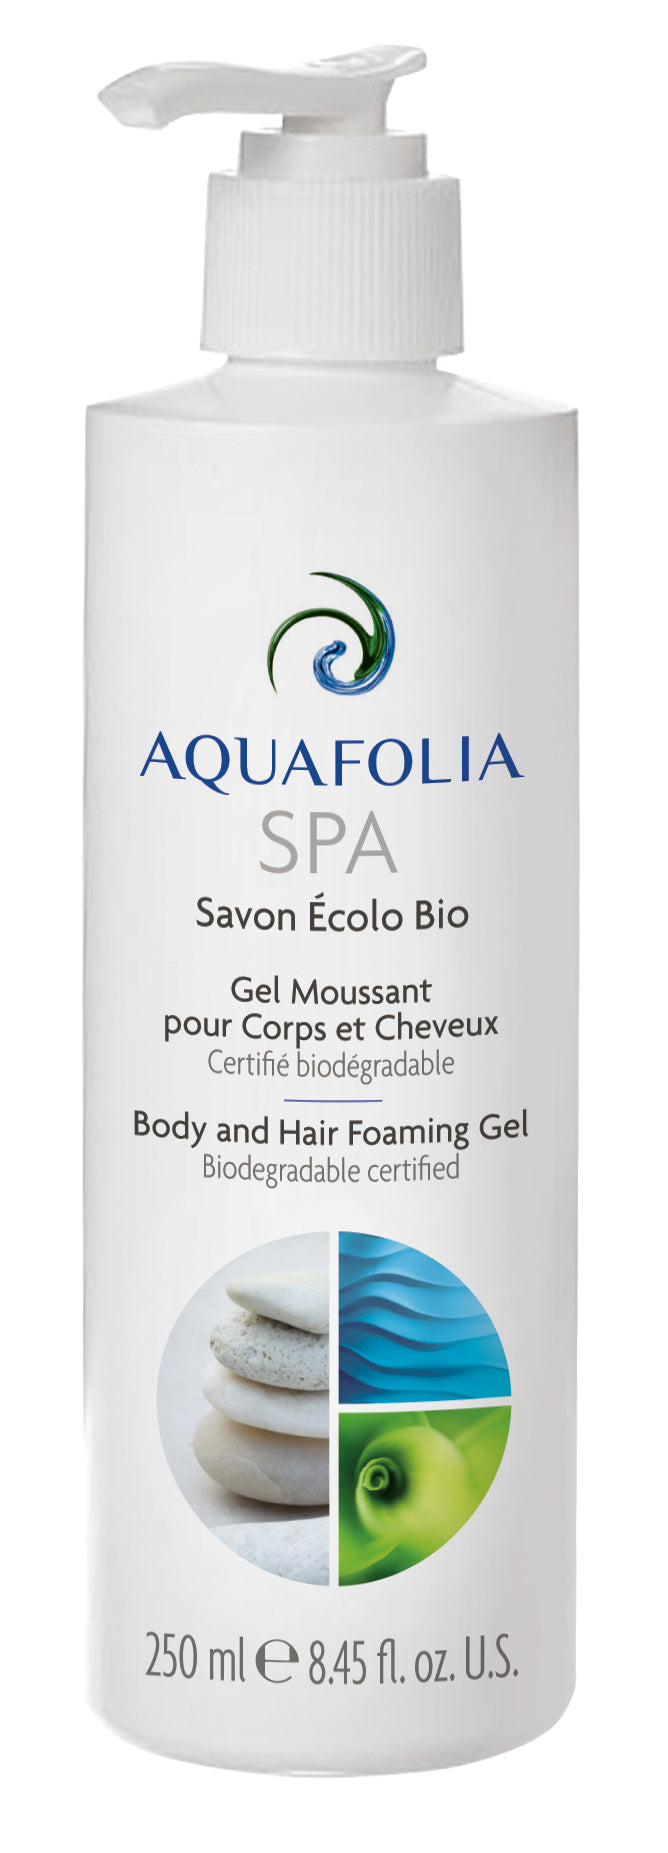 Aquafolia- Organic Ecological Soap- Products for everyone